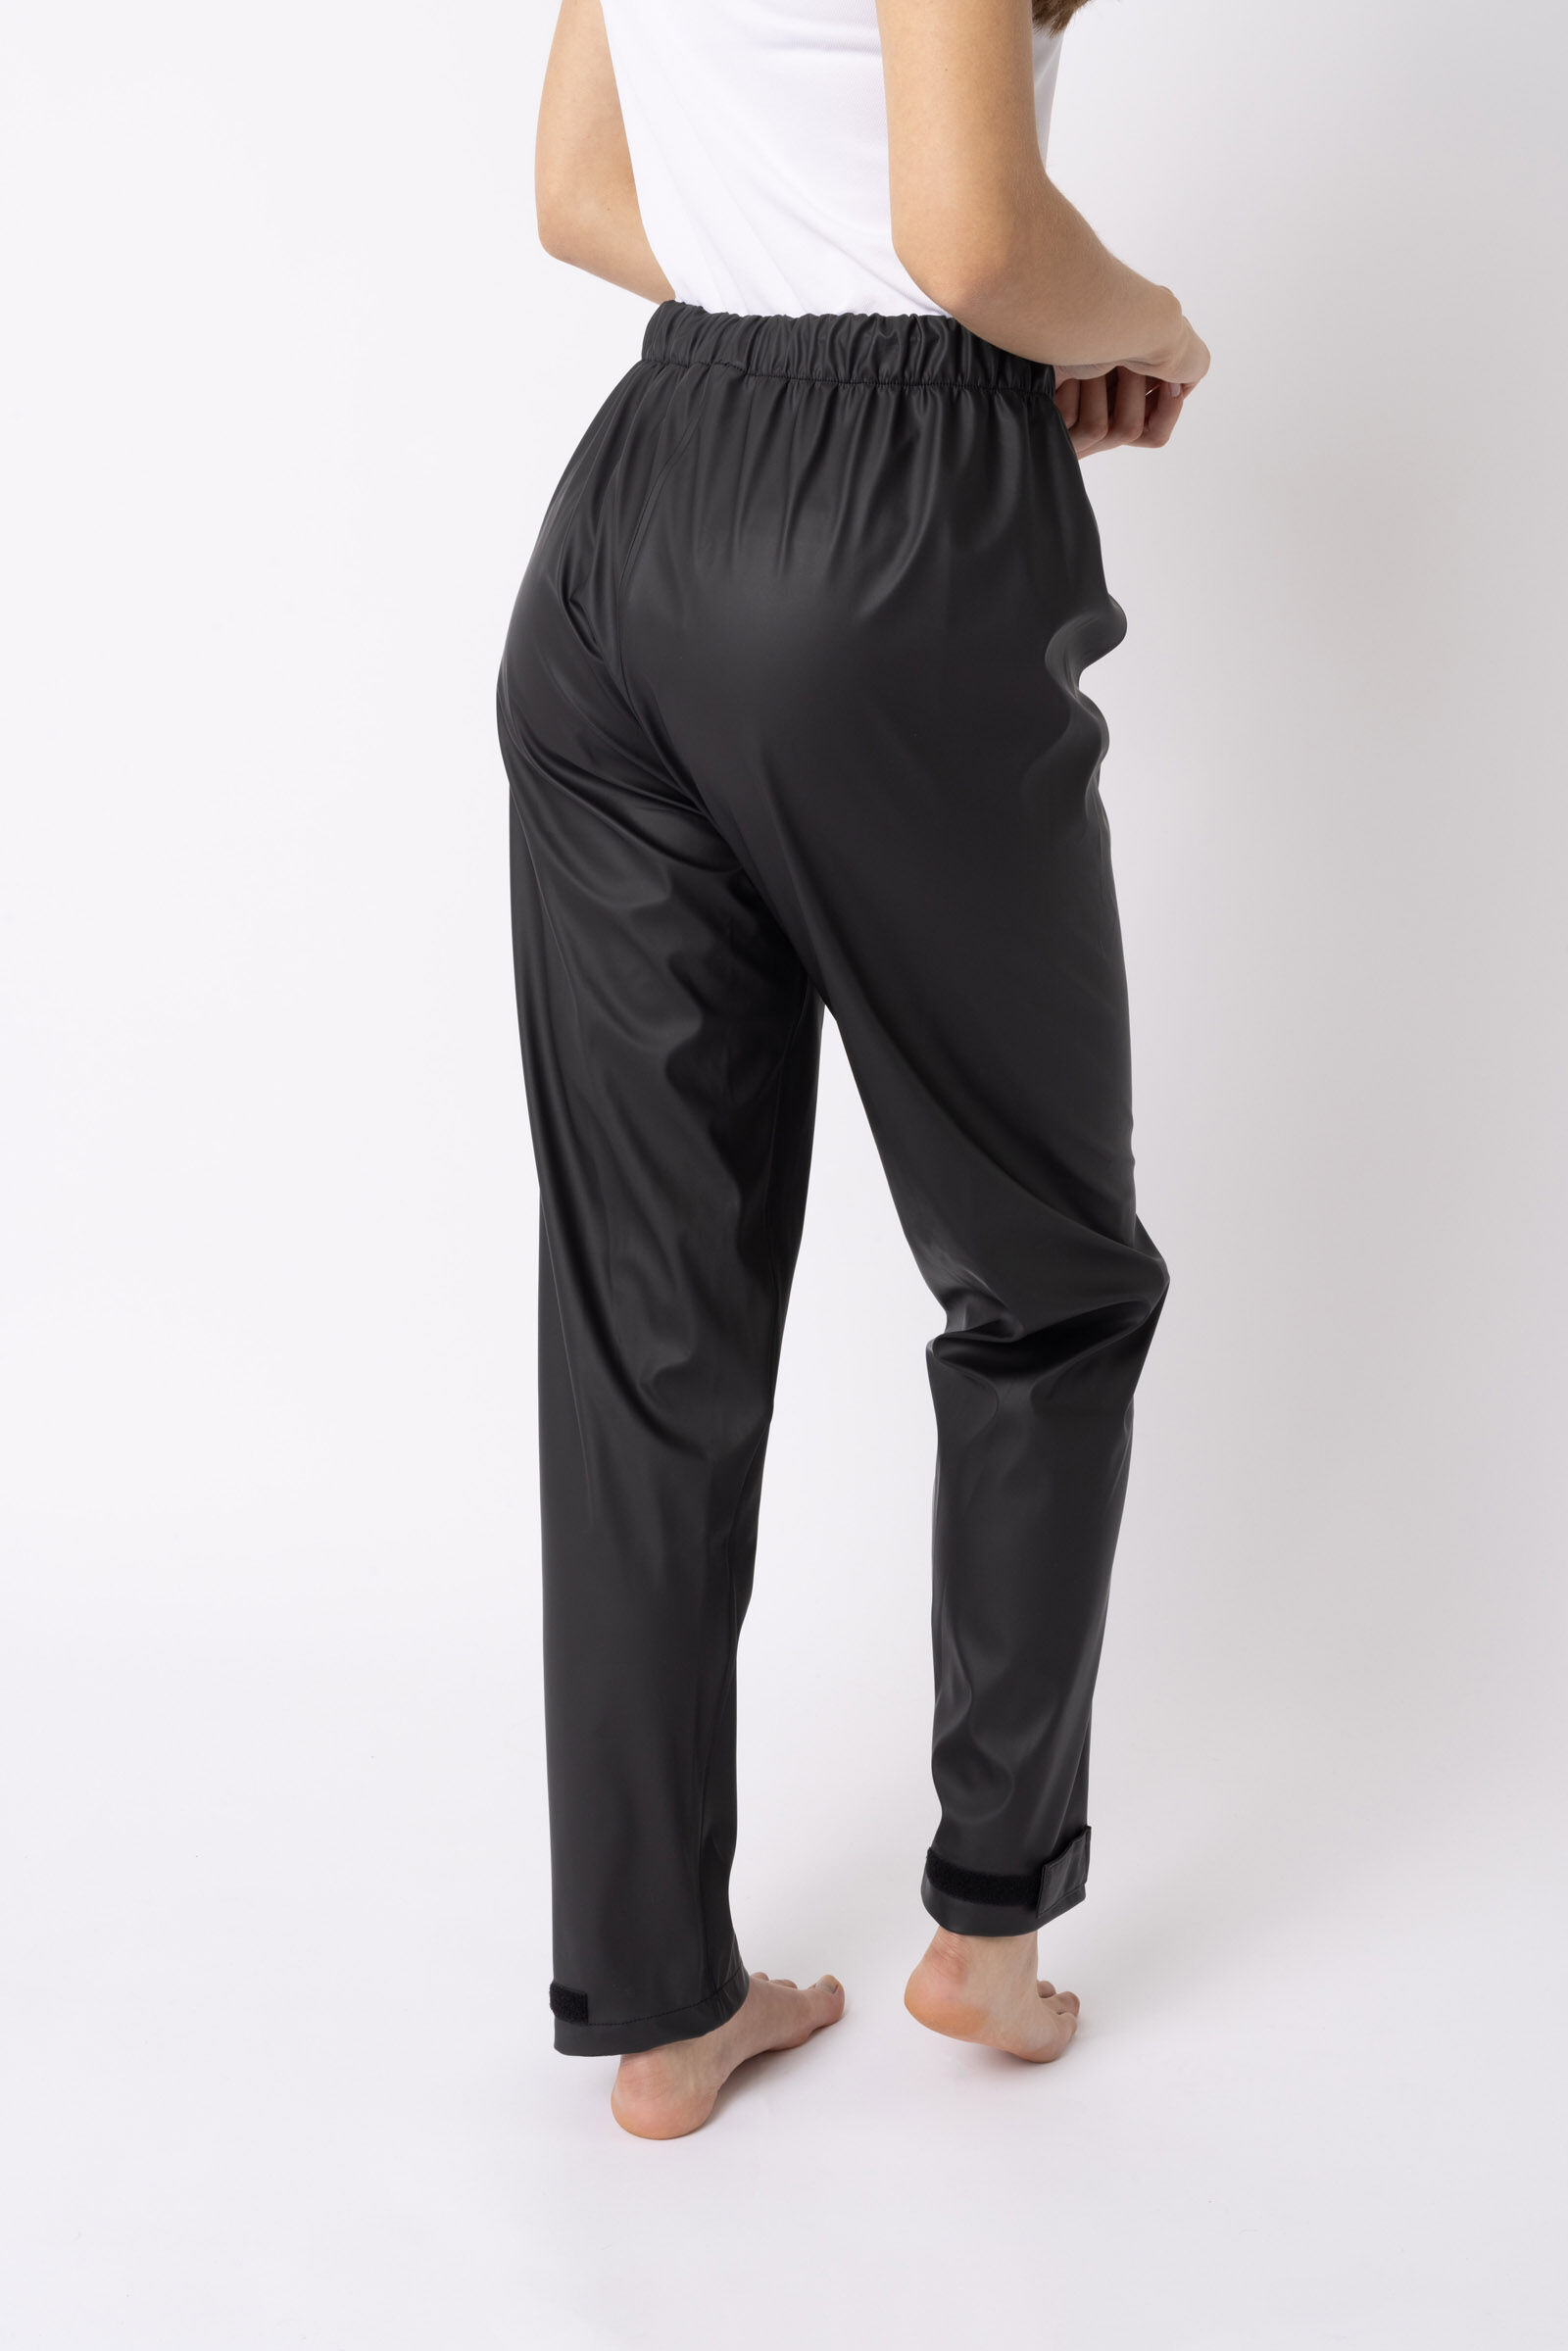 Women's Over Trousers, Waterproof Riding Trousers | Redpost